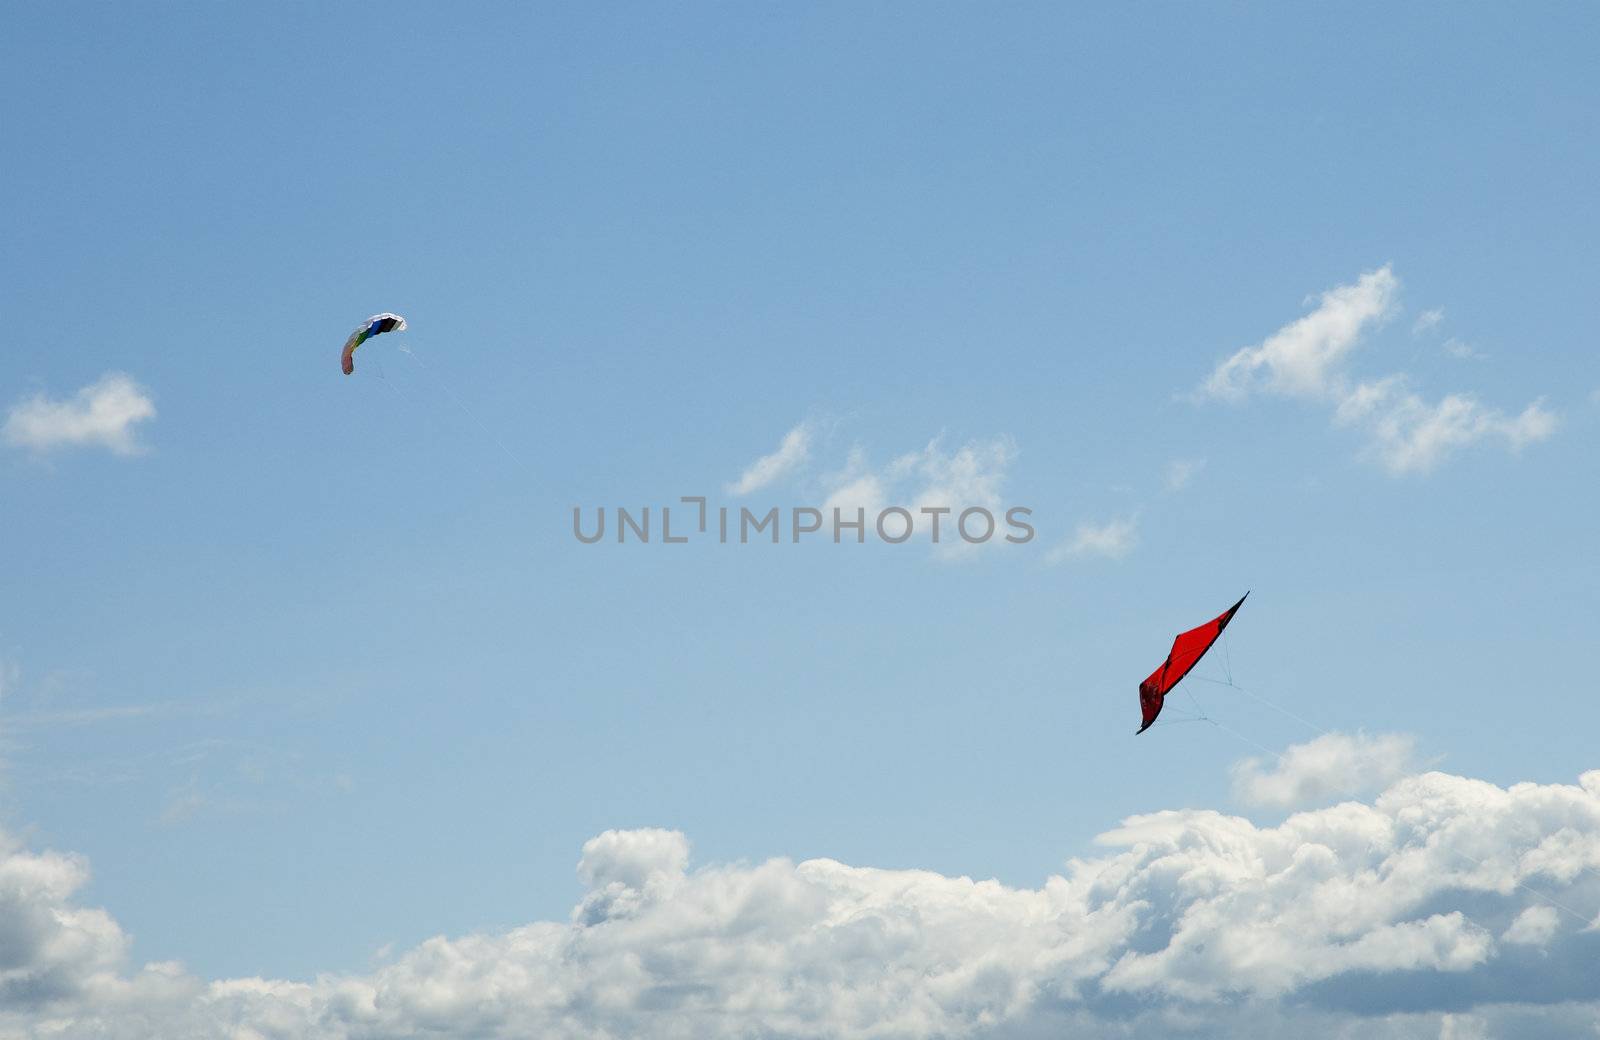 Two kites in the blue sky by shkyo30